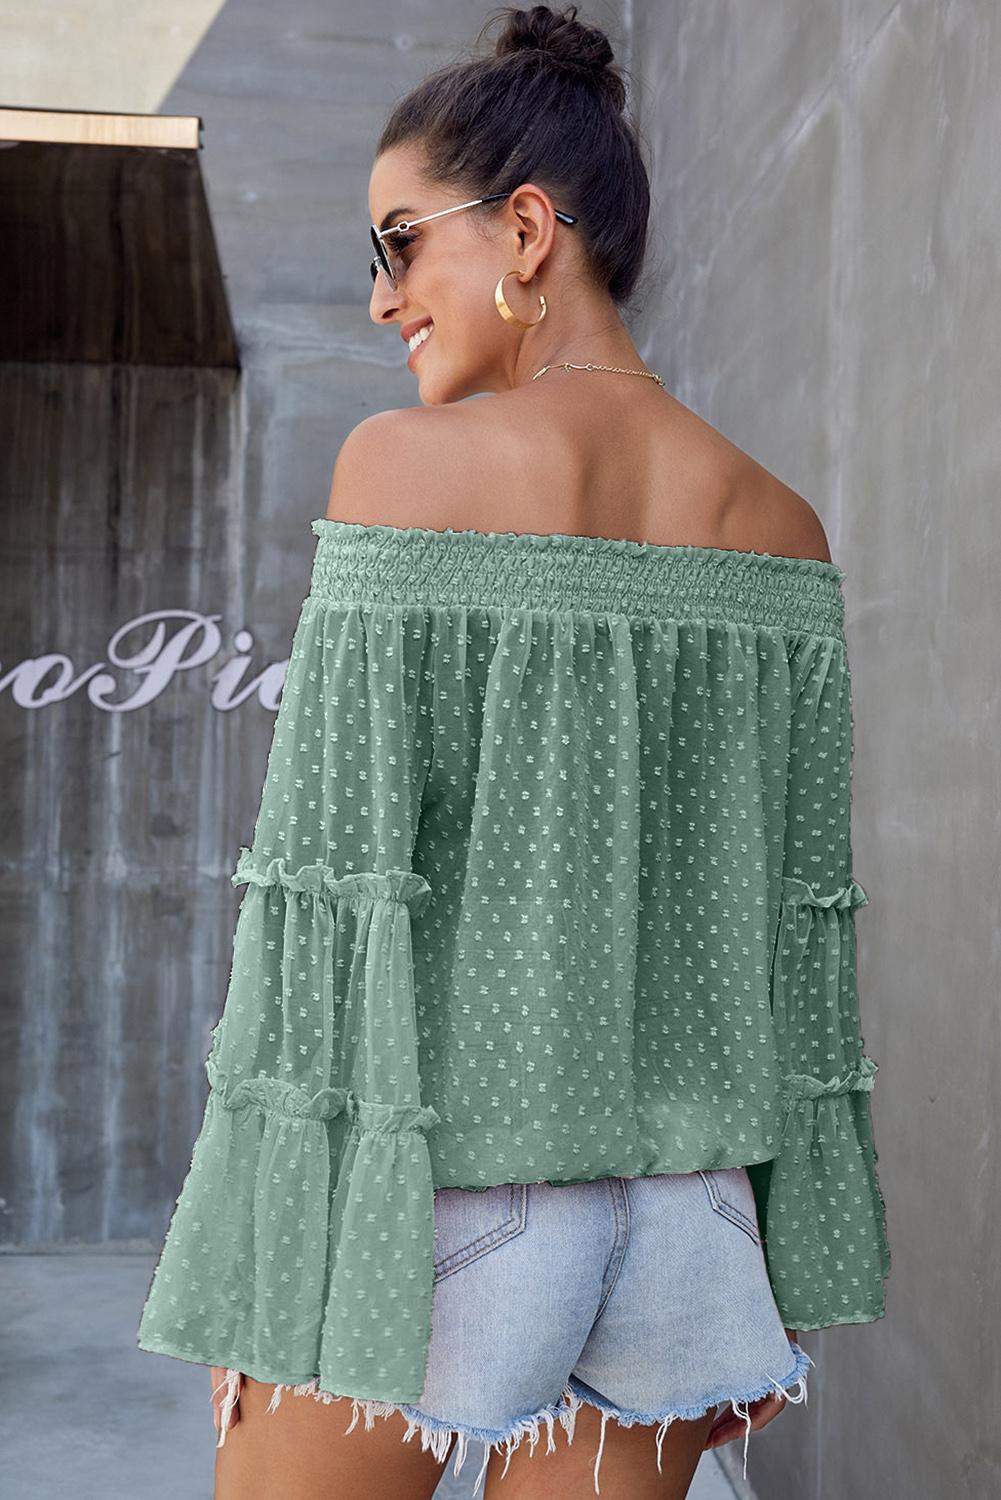 Blouse Chic a Pois Suisse Vert Manches Longues Epaule Denudee